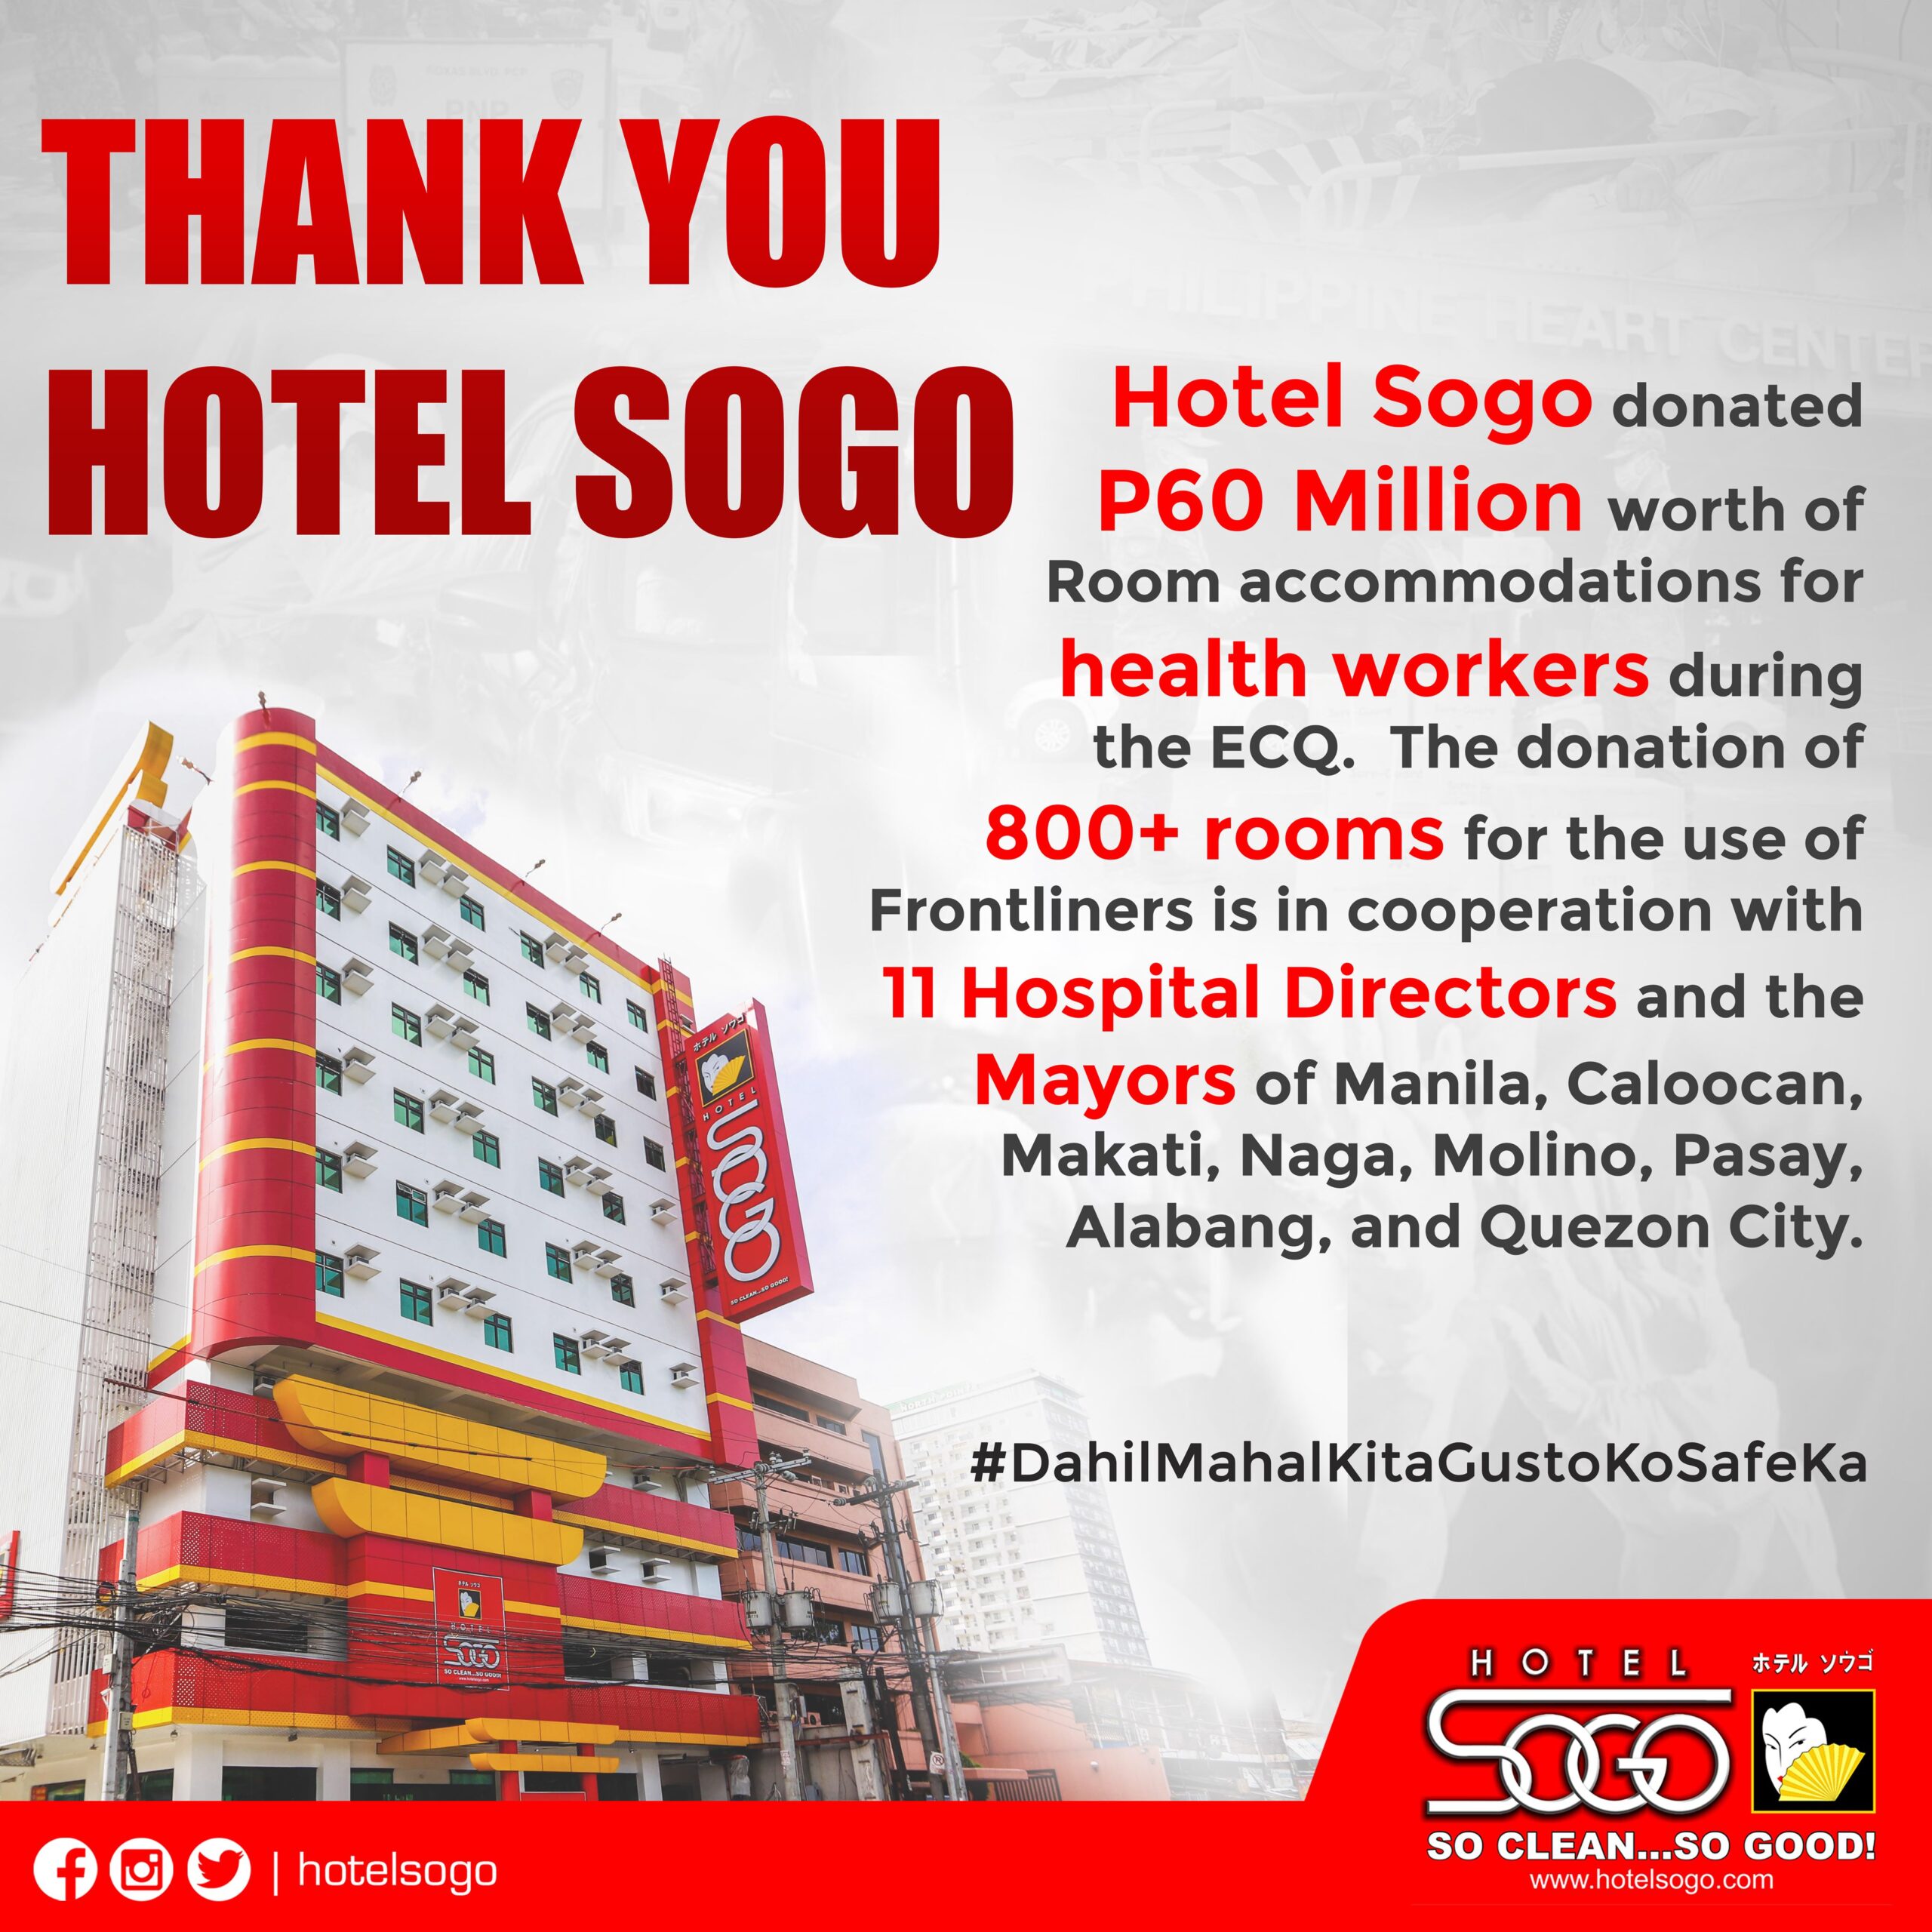 Hotel Sogo Shows Support To Frontliners